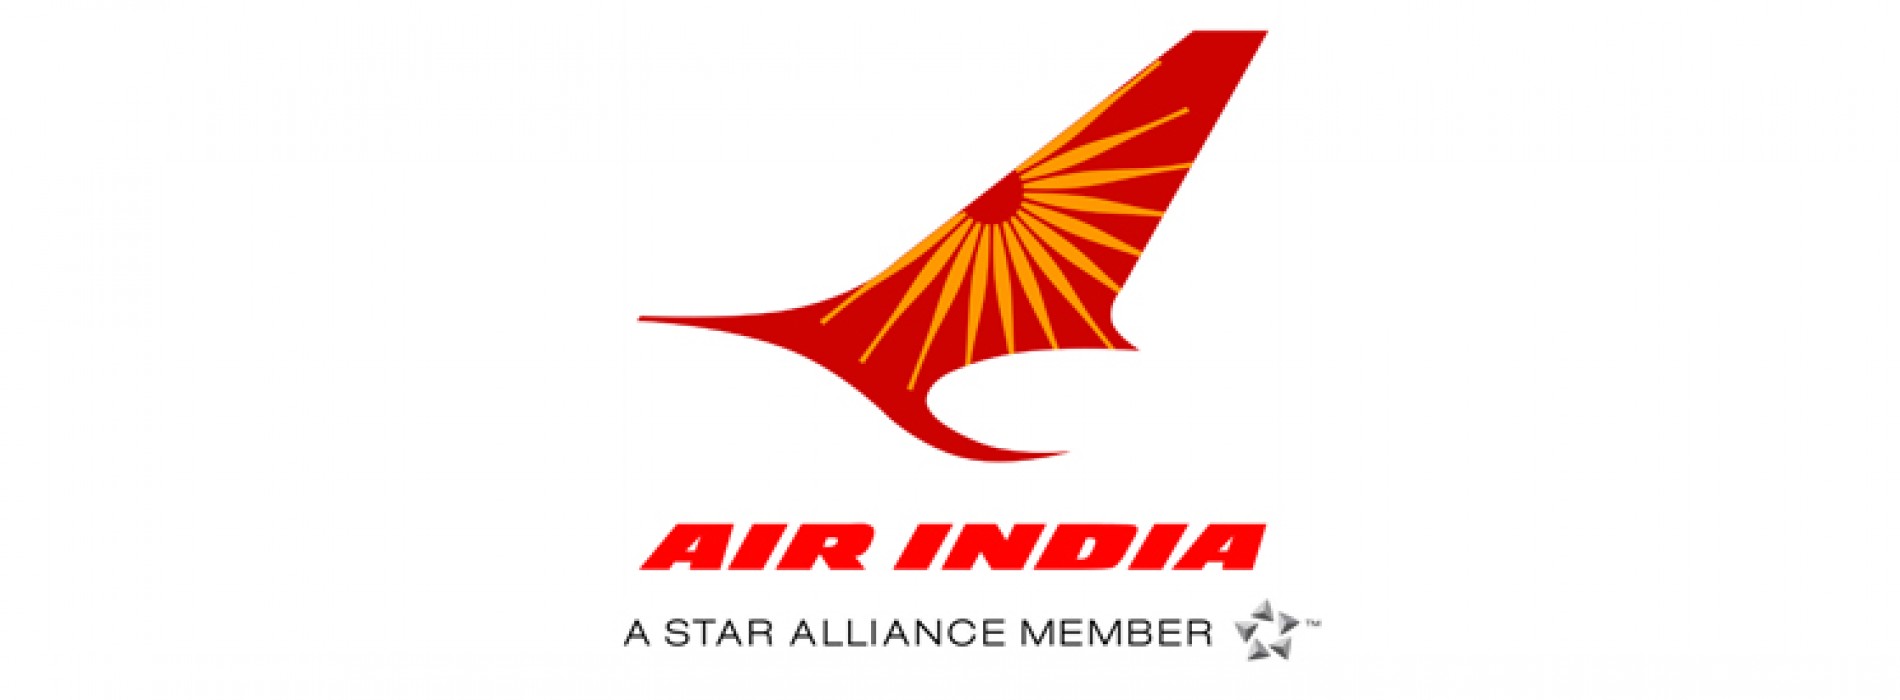 Air India Star Alliance successful partnership completes one year